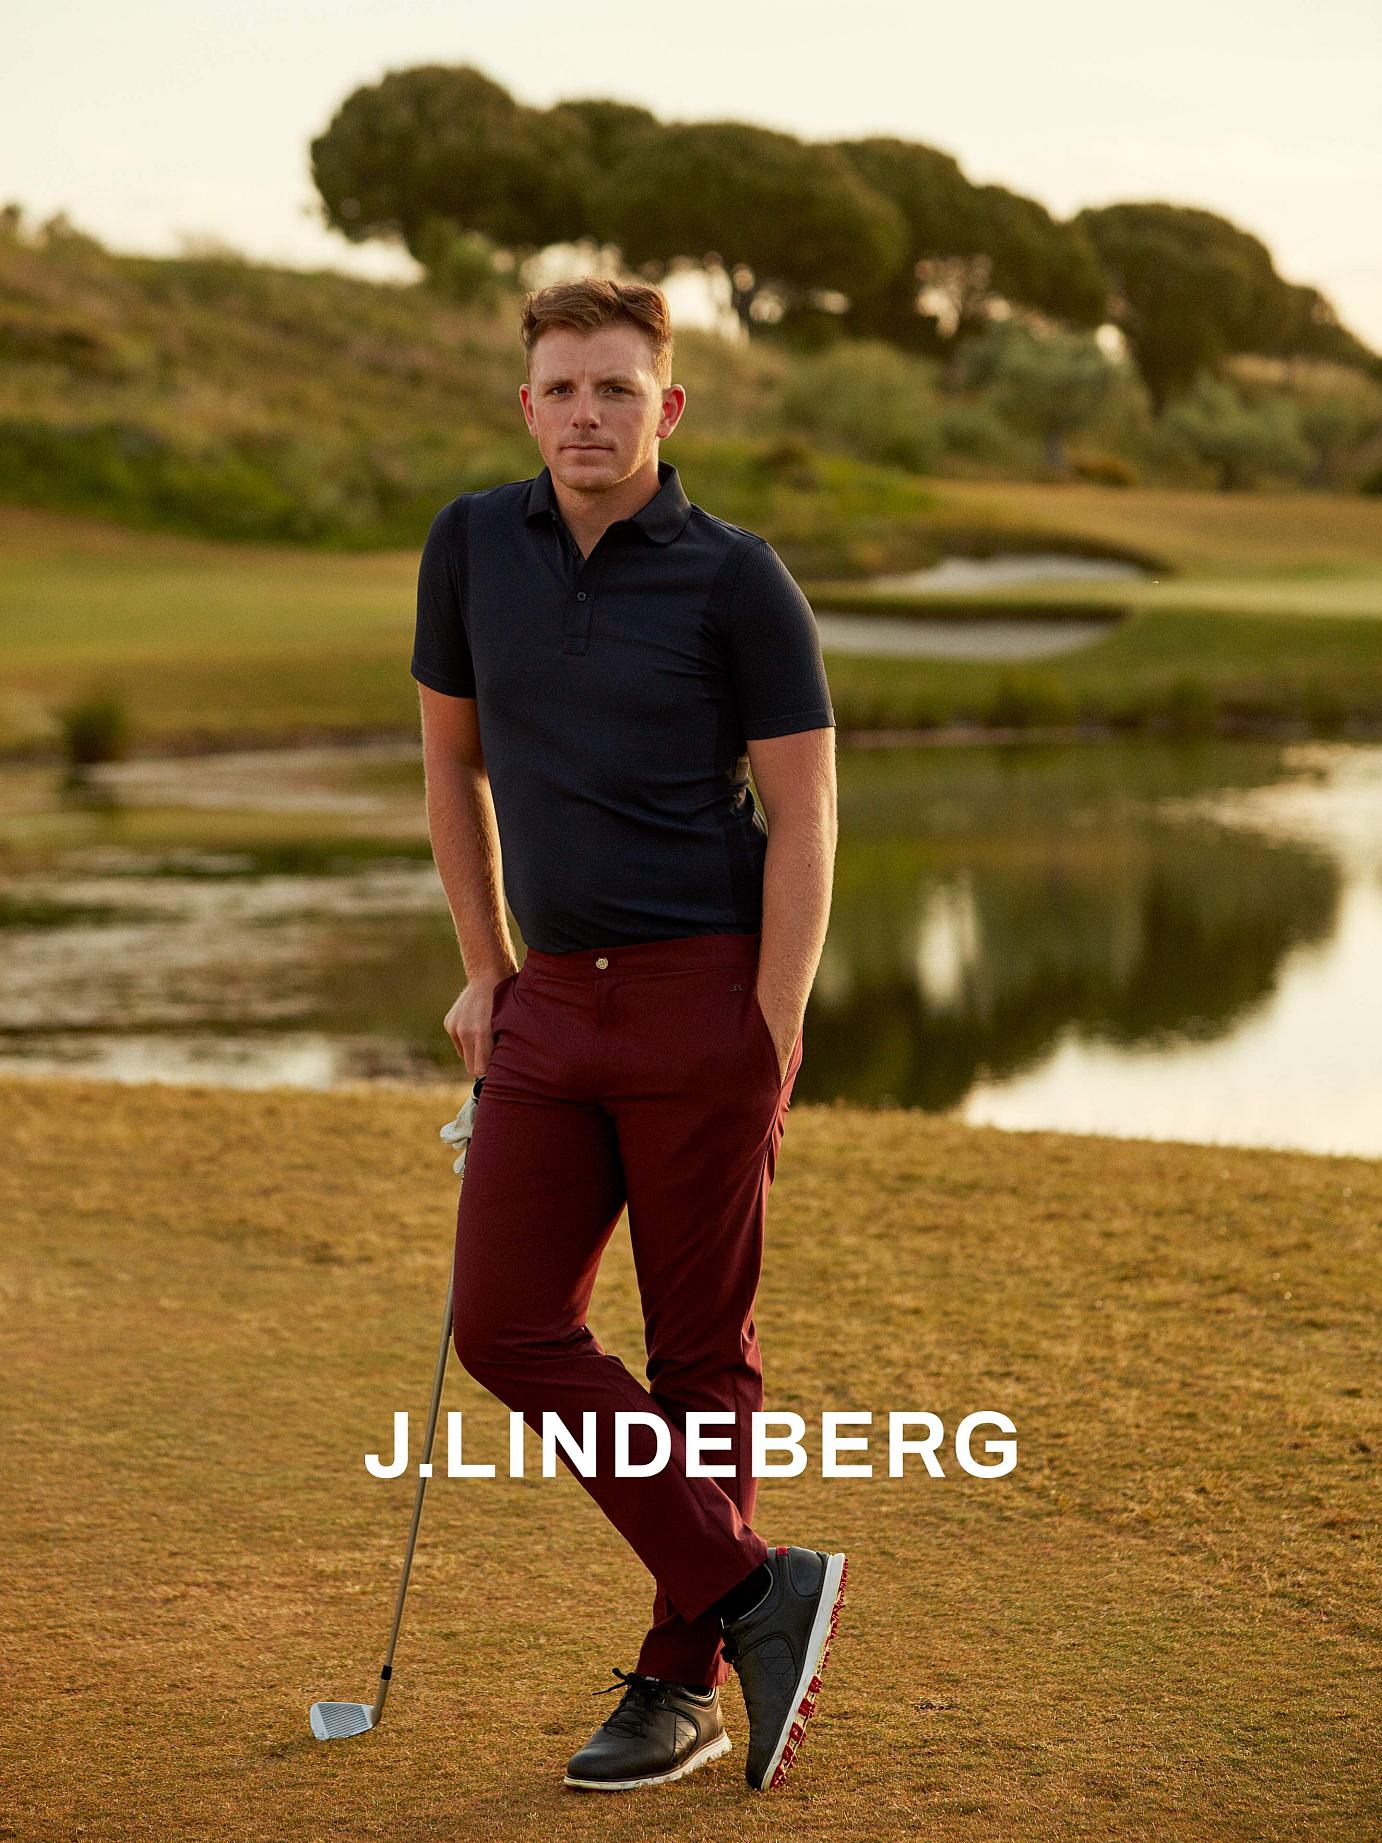 CoqCreative power by ProductionLink s.r.l. J-Lindeberg-Golf-Club J-Lindeberg-Golf-Club  J-Lindeberg-Golf-Club